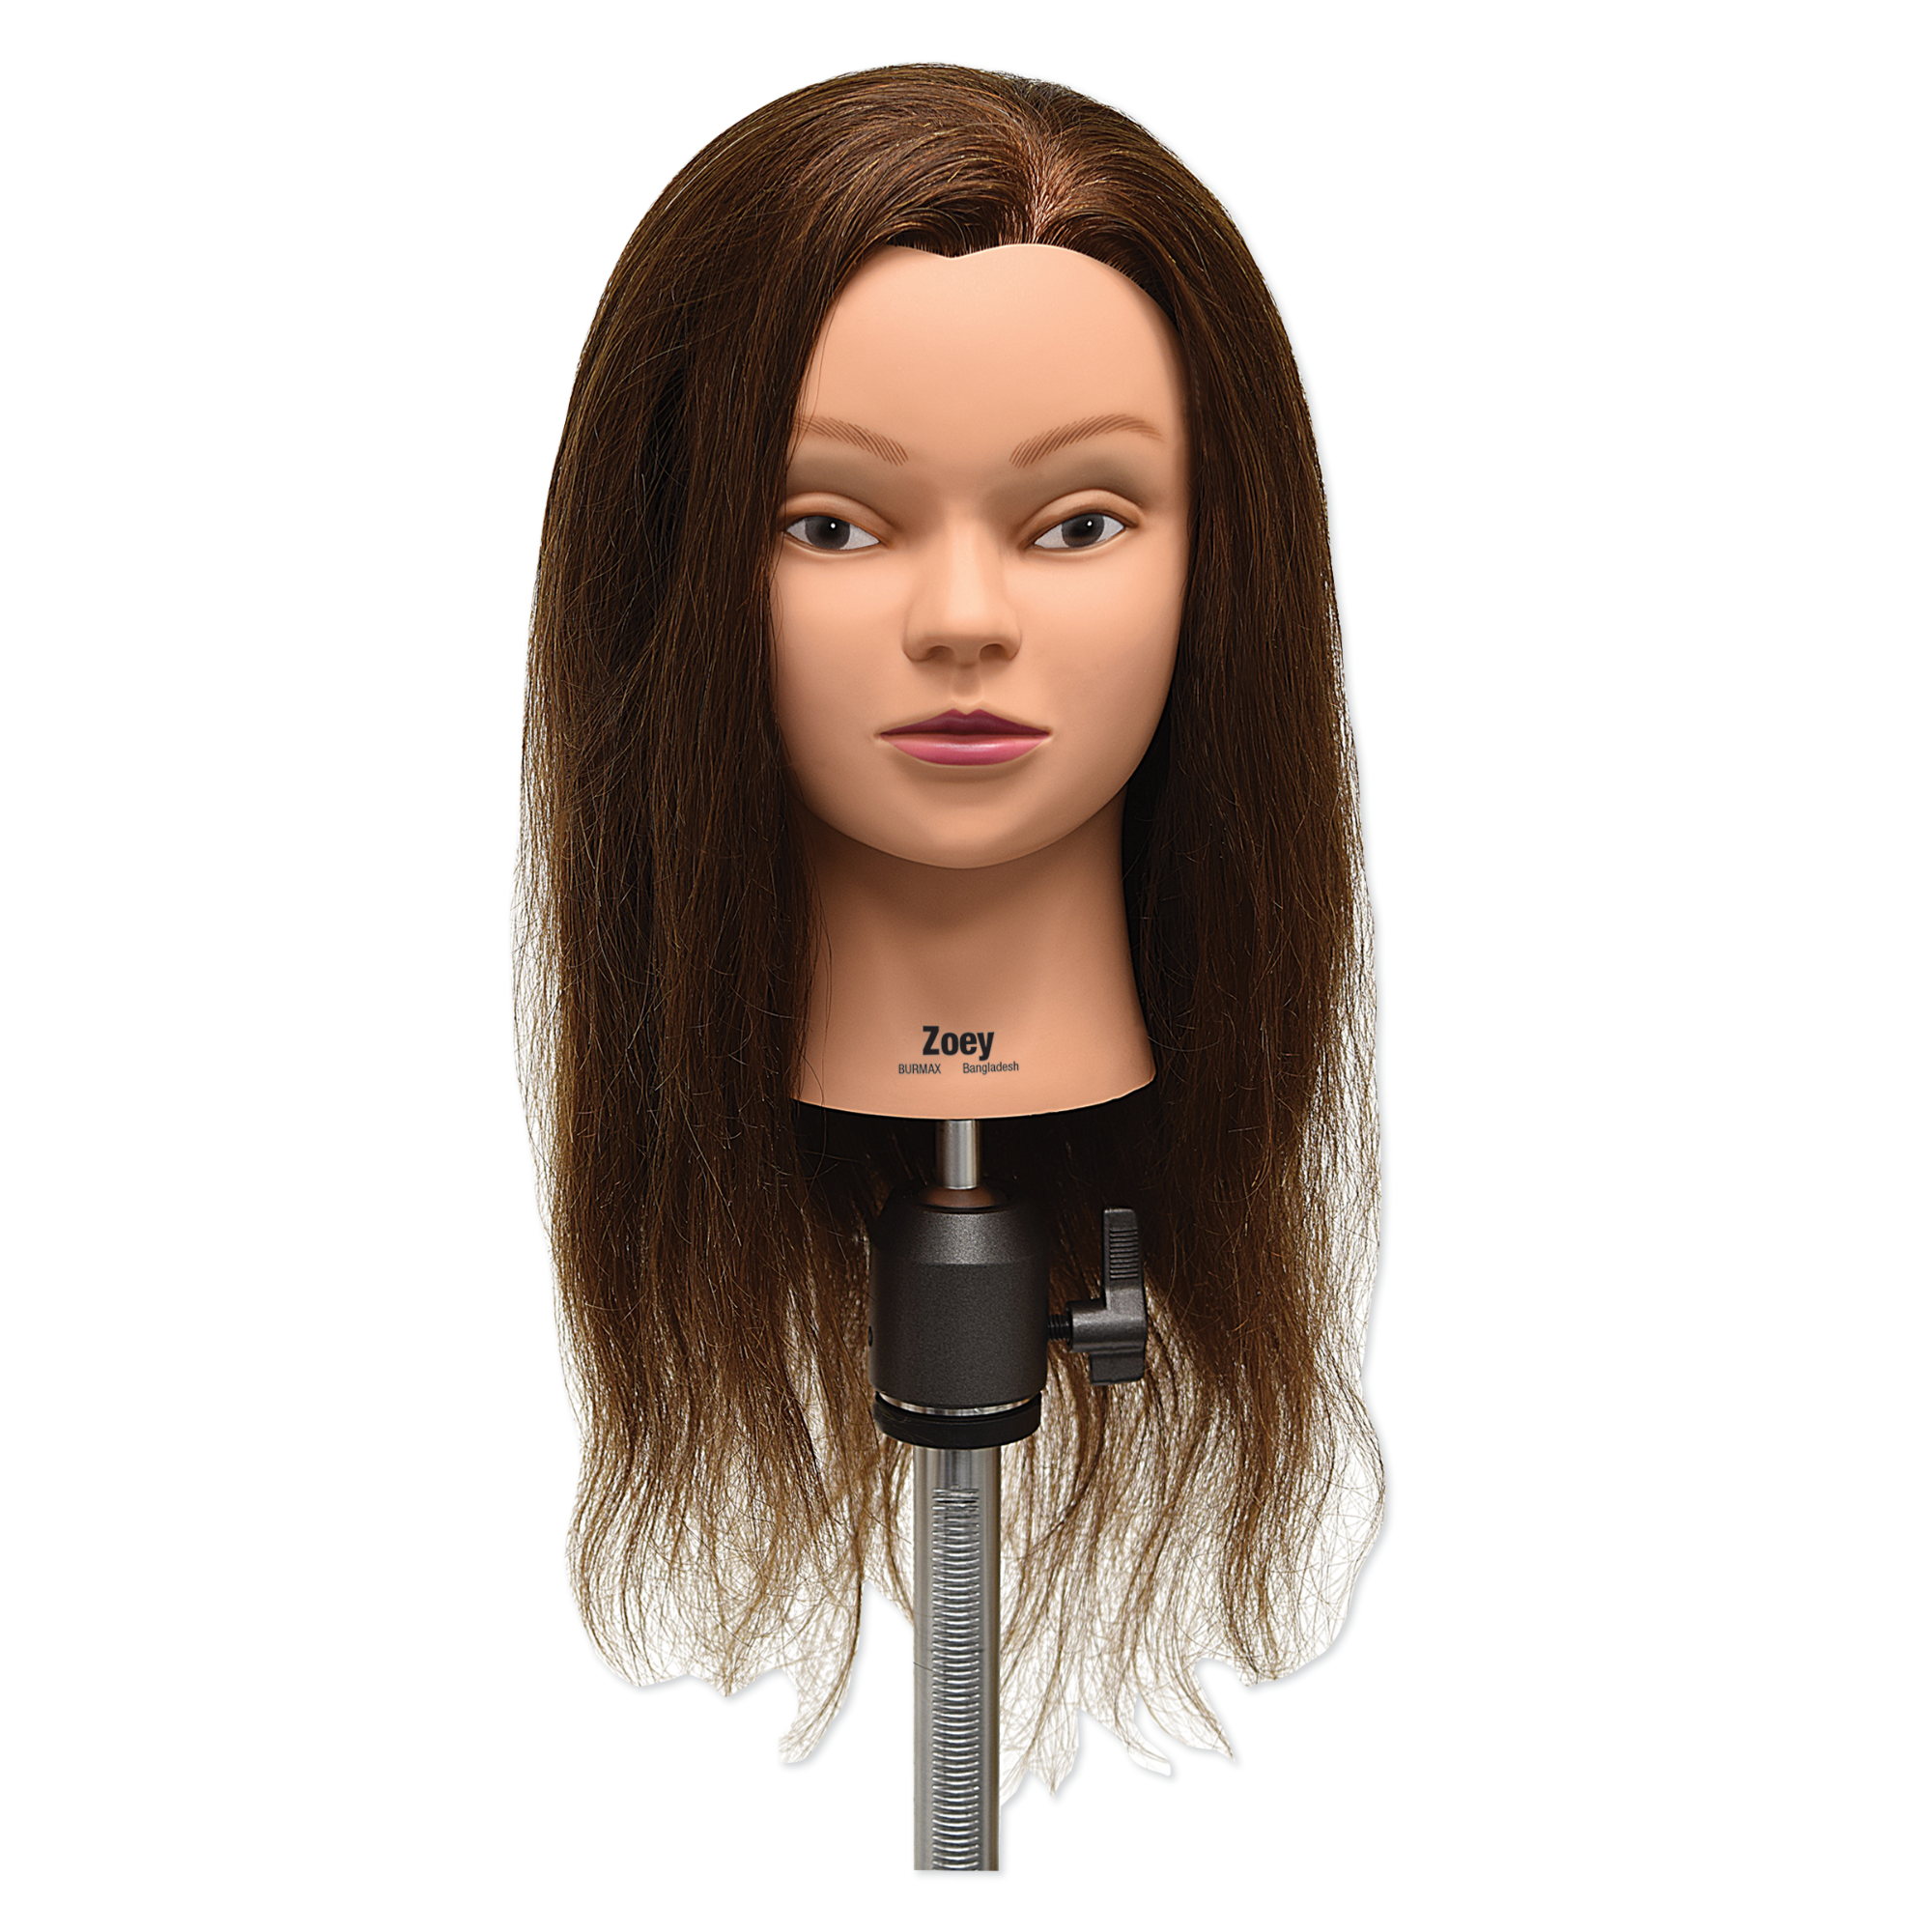 Burmax, Other, Great Halloween Decorcosmetology Mannequin Head With Human  Hair Debra By Burmax